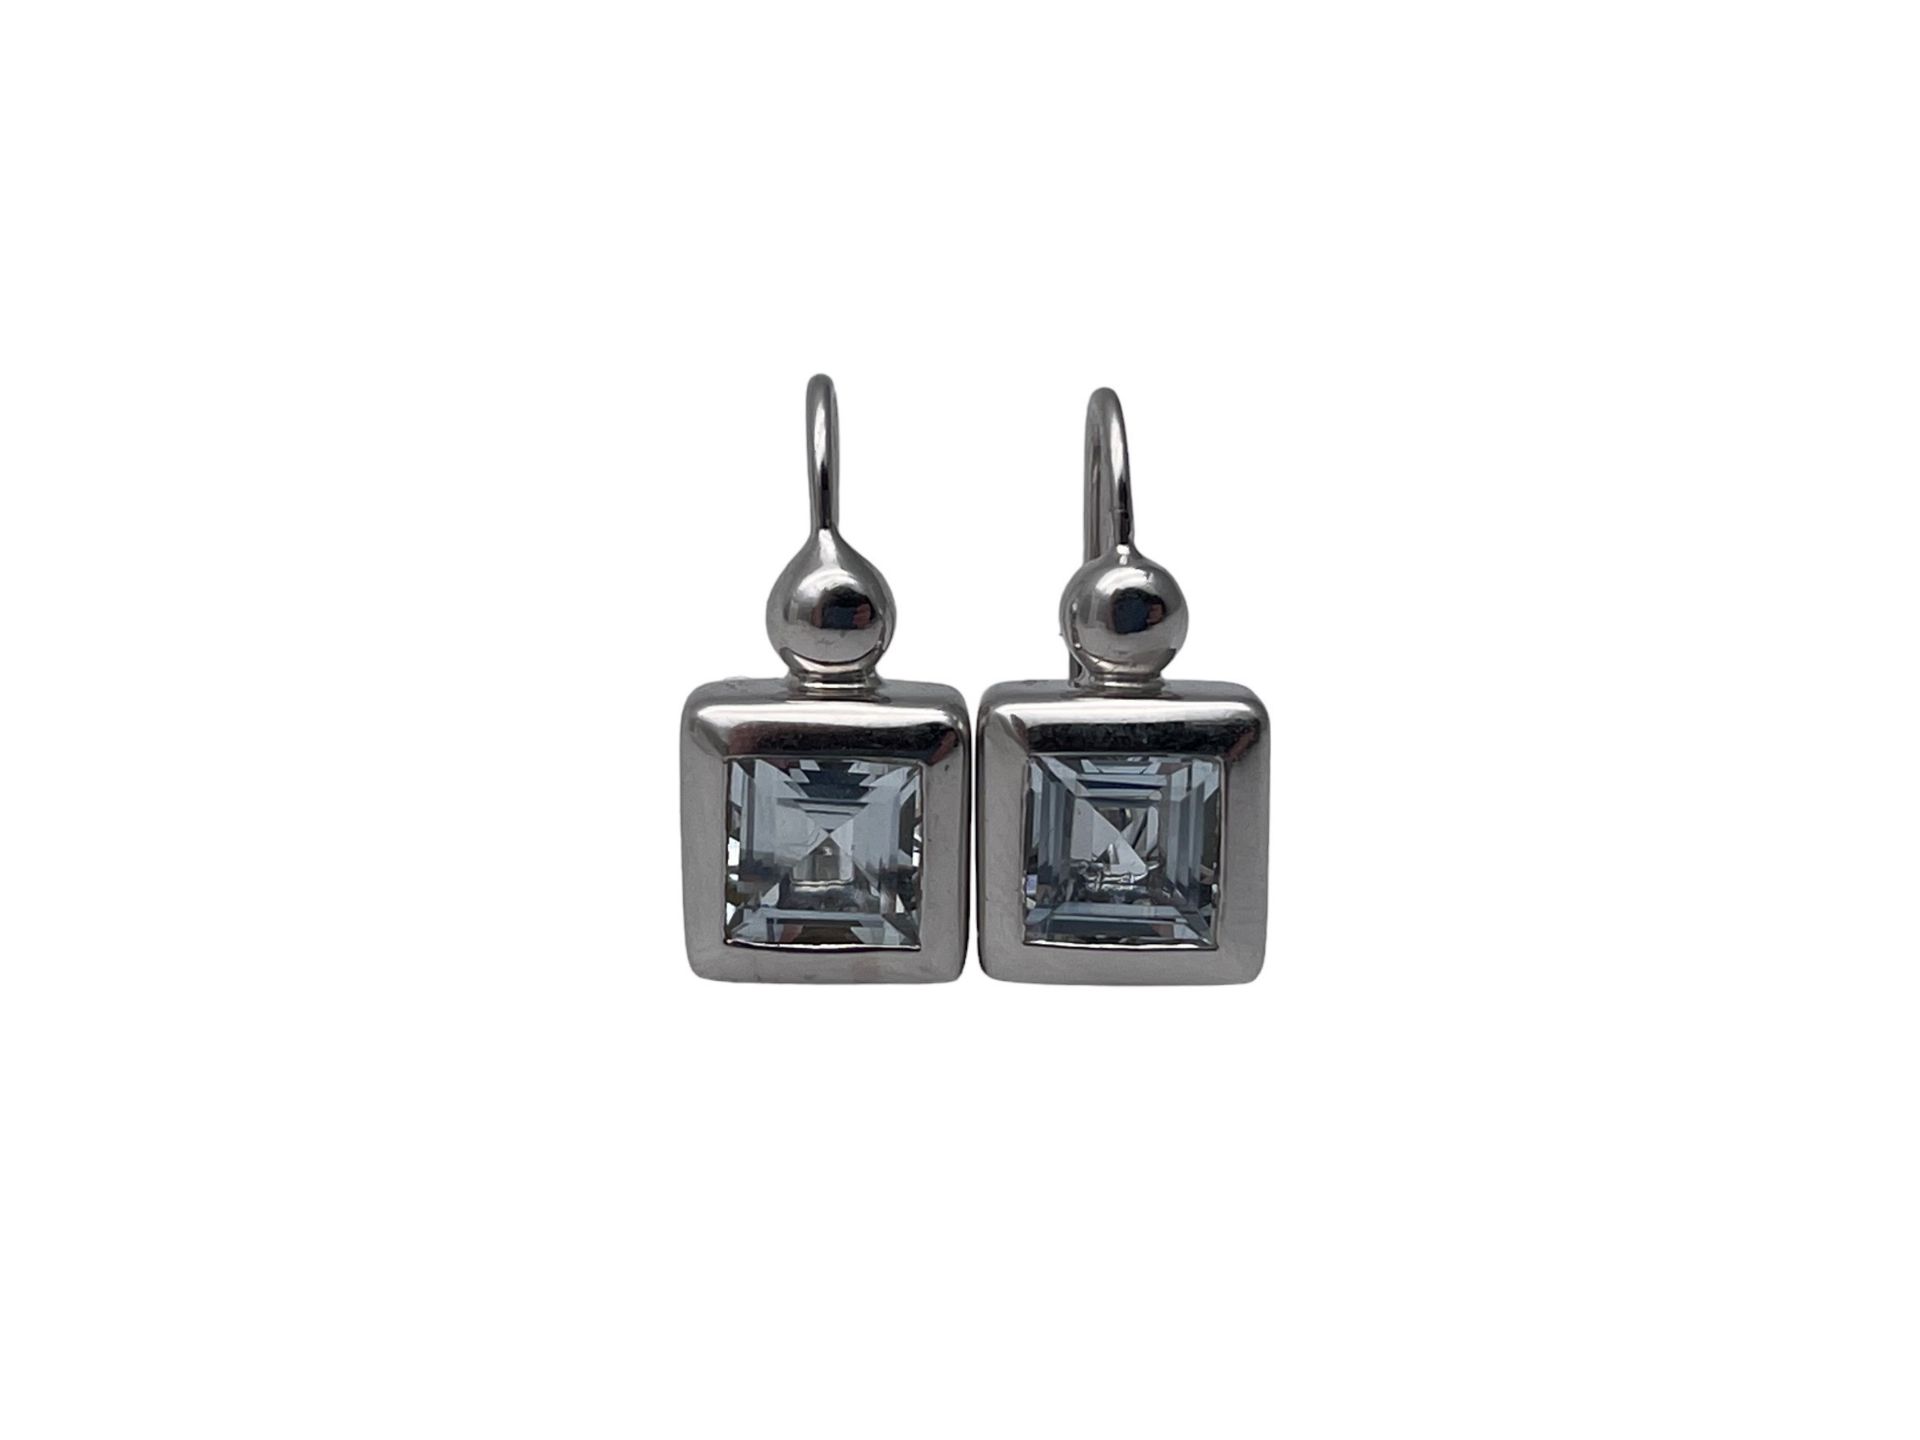 RRP-£3950.00 18ct WHITE GOLD LADIES AQUAMARINE EARRINGS, SET WITH TWO EMERALD CUT STONES, TOTAL CARA